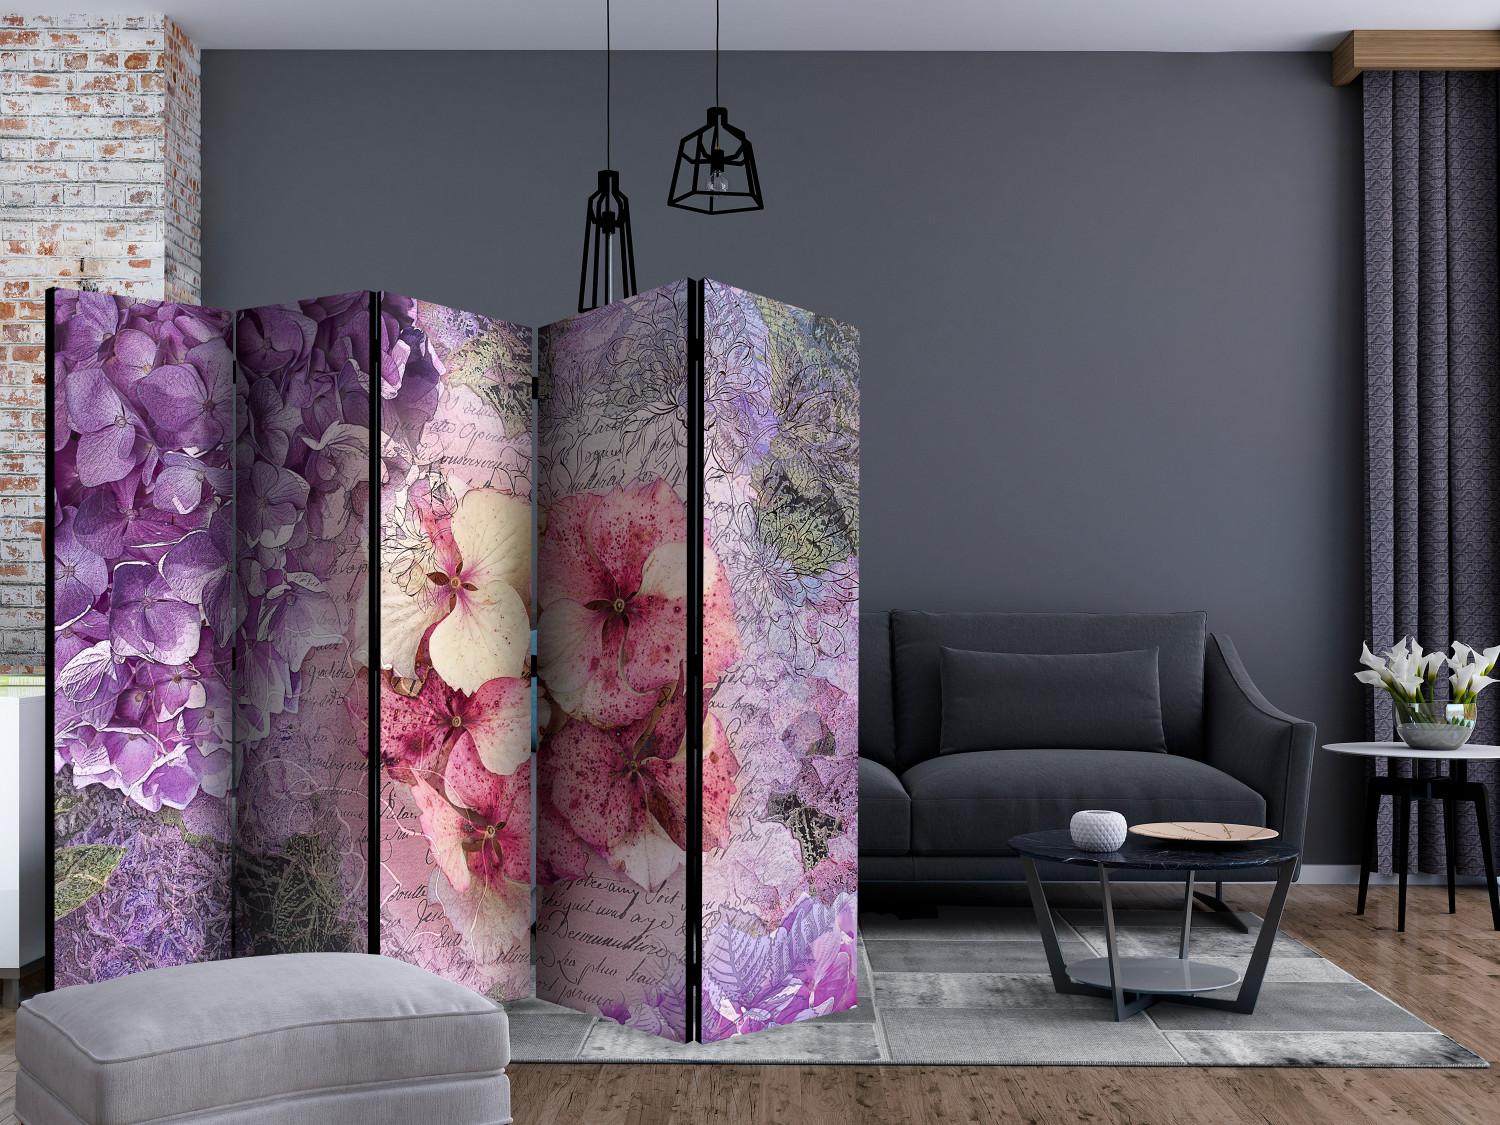 Room Divider Memory II (5-piece) - colorful flowers and inscriptions in the background